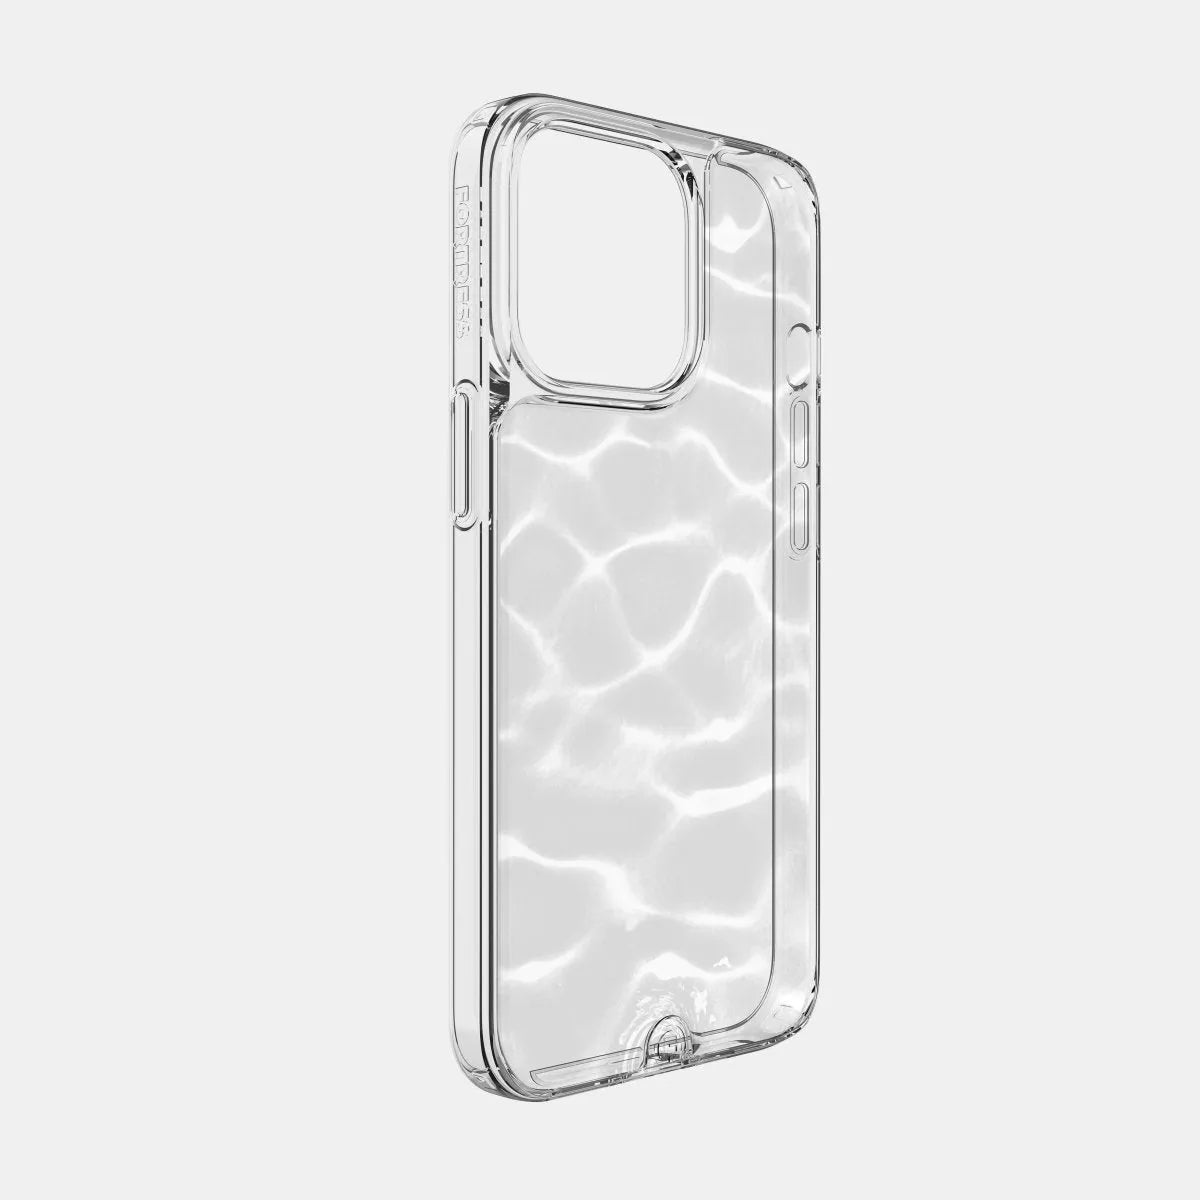 Fortress Swipe Style Inserts (Curiosity Collection) for iPhone 13 Pro Max Infinite Glass Case  Scooch Infinite Glass